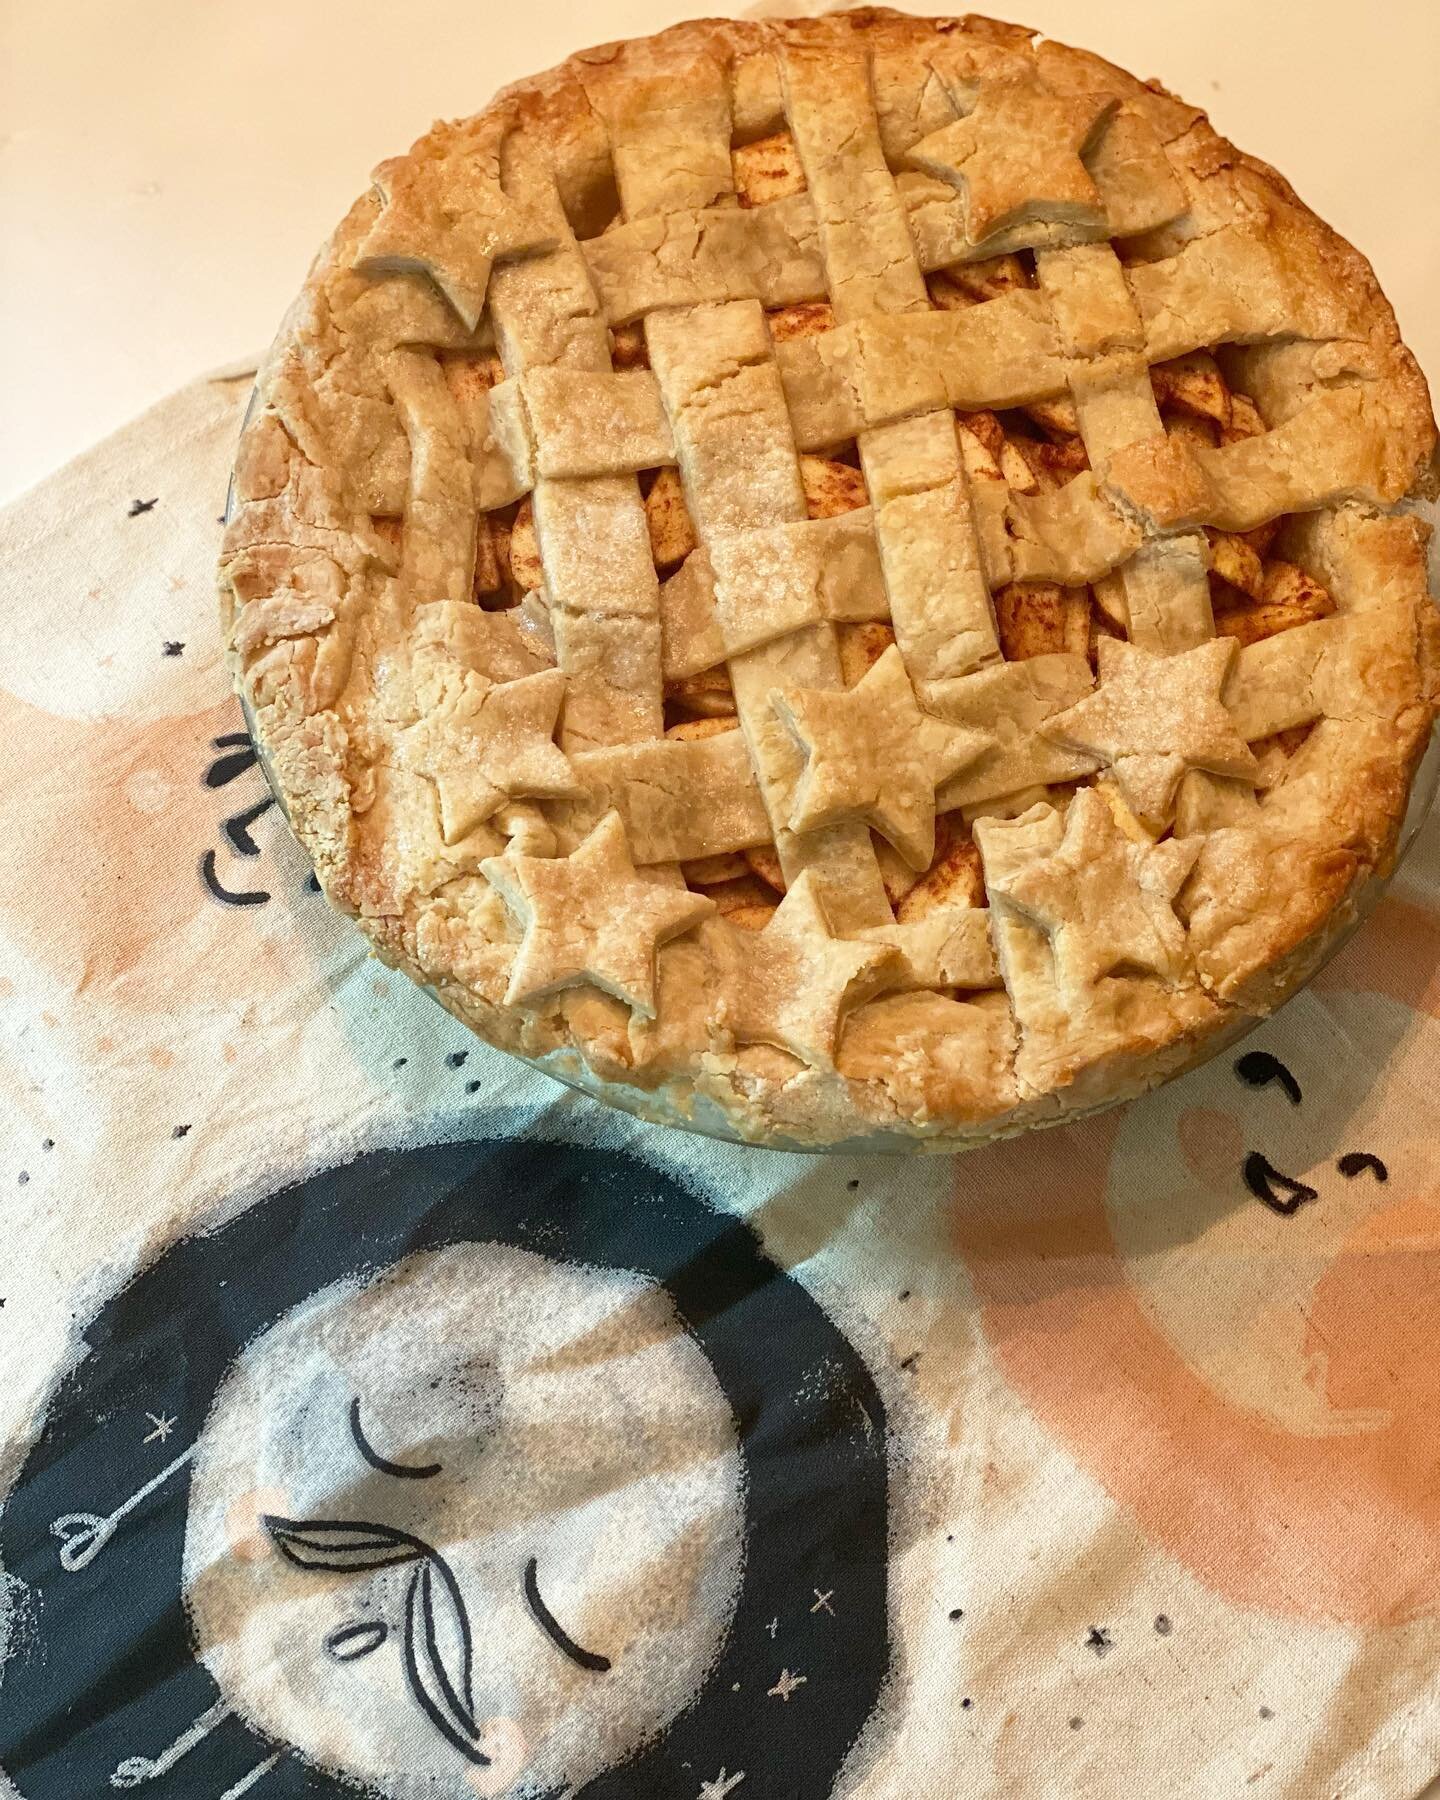 Made apple pie for the first time ever today! Don&rsquo;t ask me how it tastes yet as I&rsquo;m still waiting for it to cool off 🥺🍎🥧 

Definitely not as easy to make as @the_bananadiaries makes it look on YouTube, but I have a feeling with practic